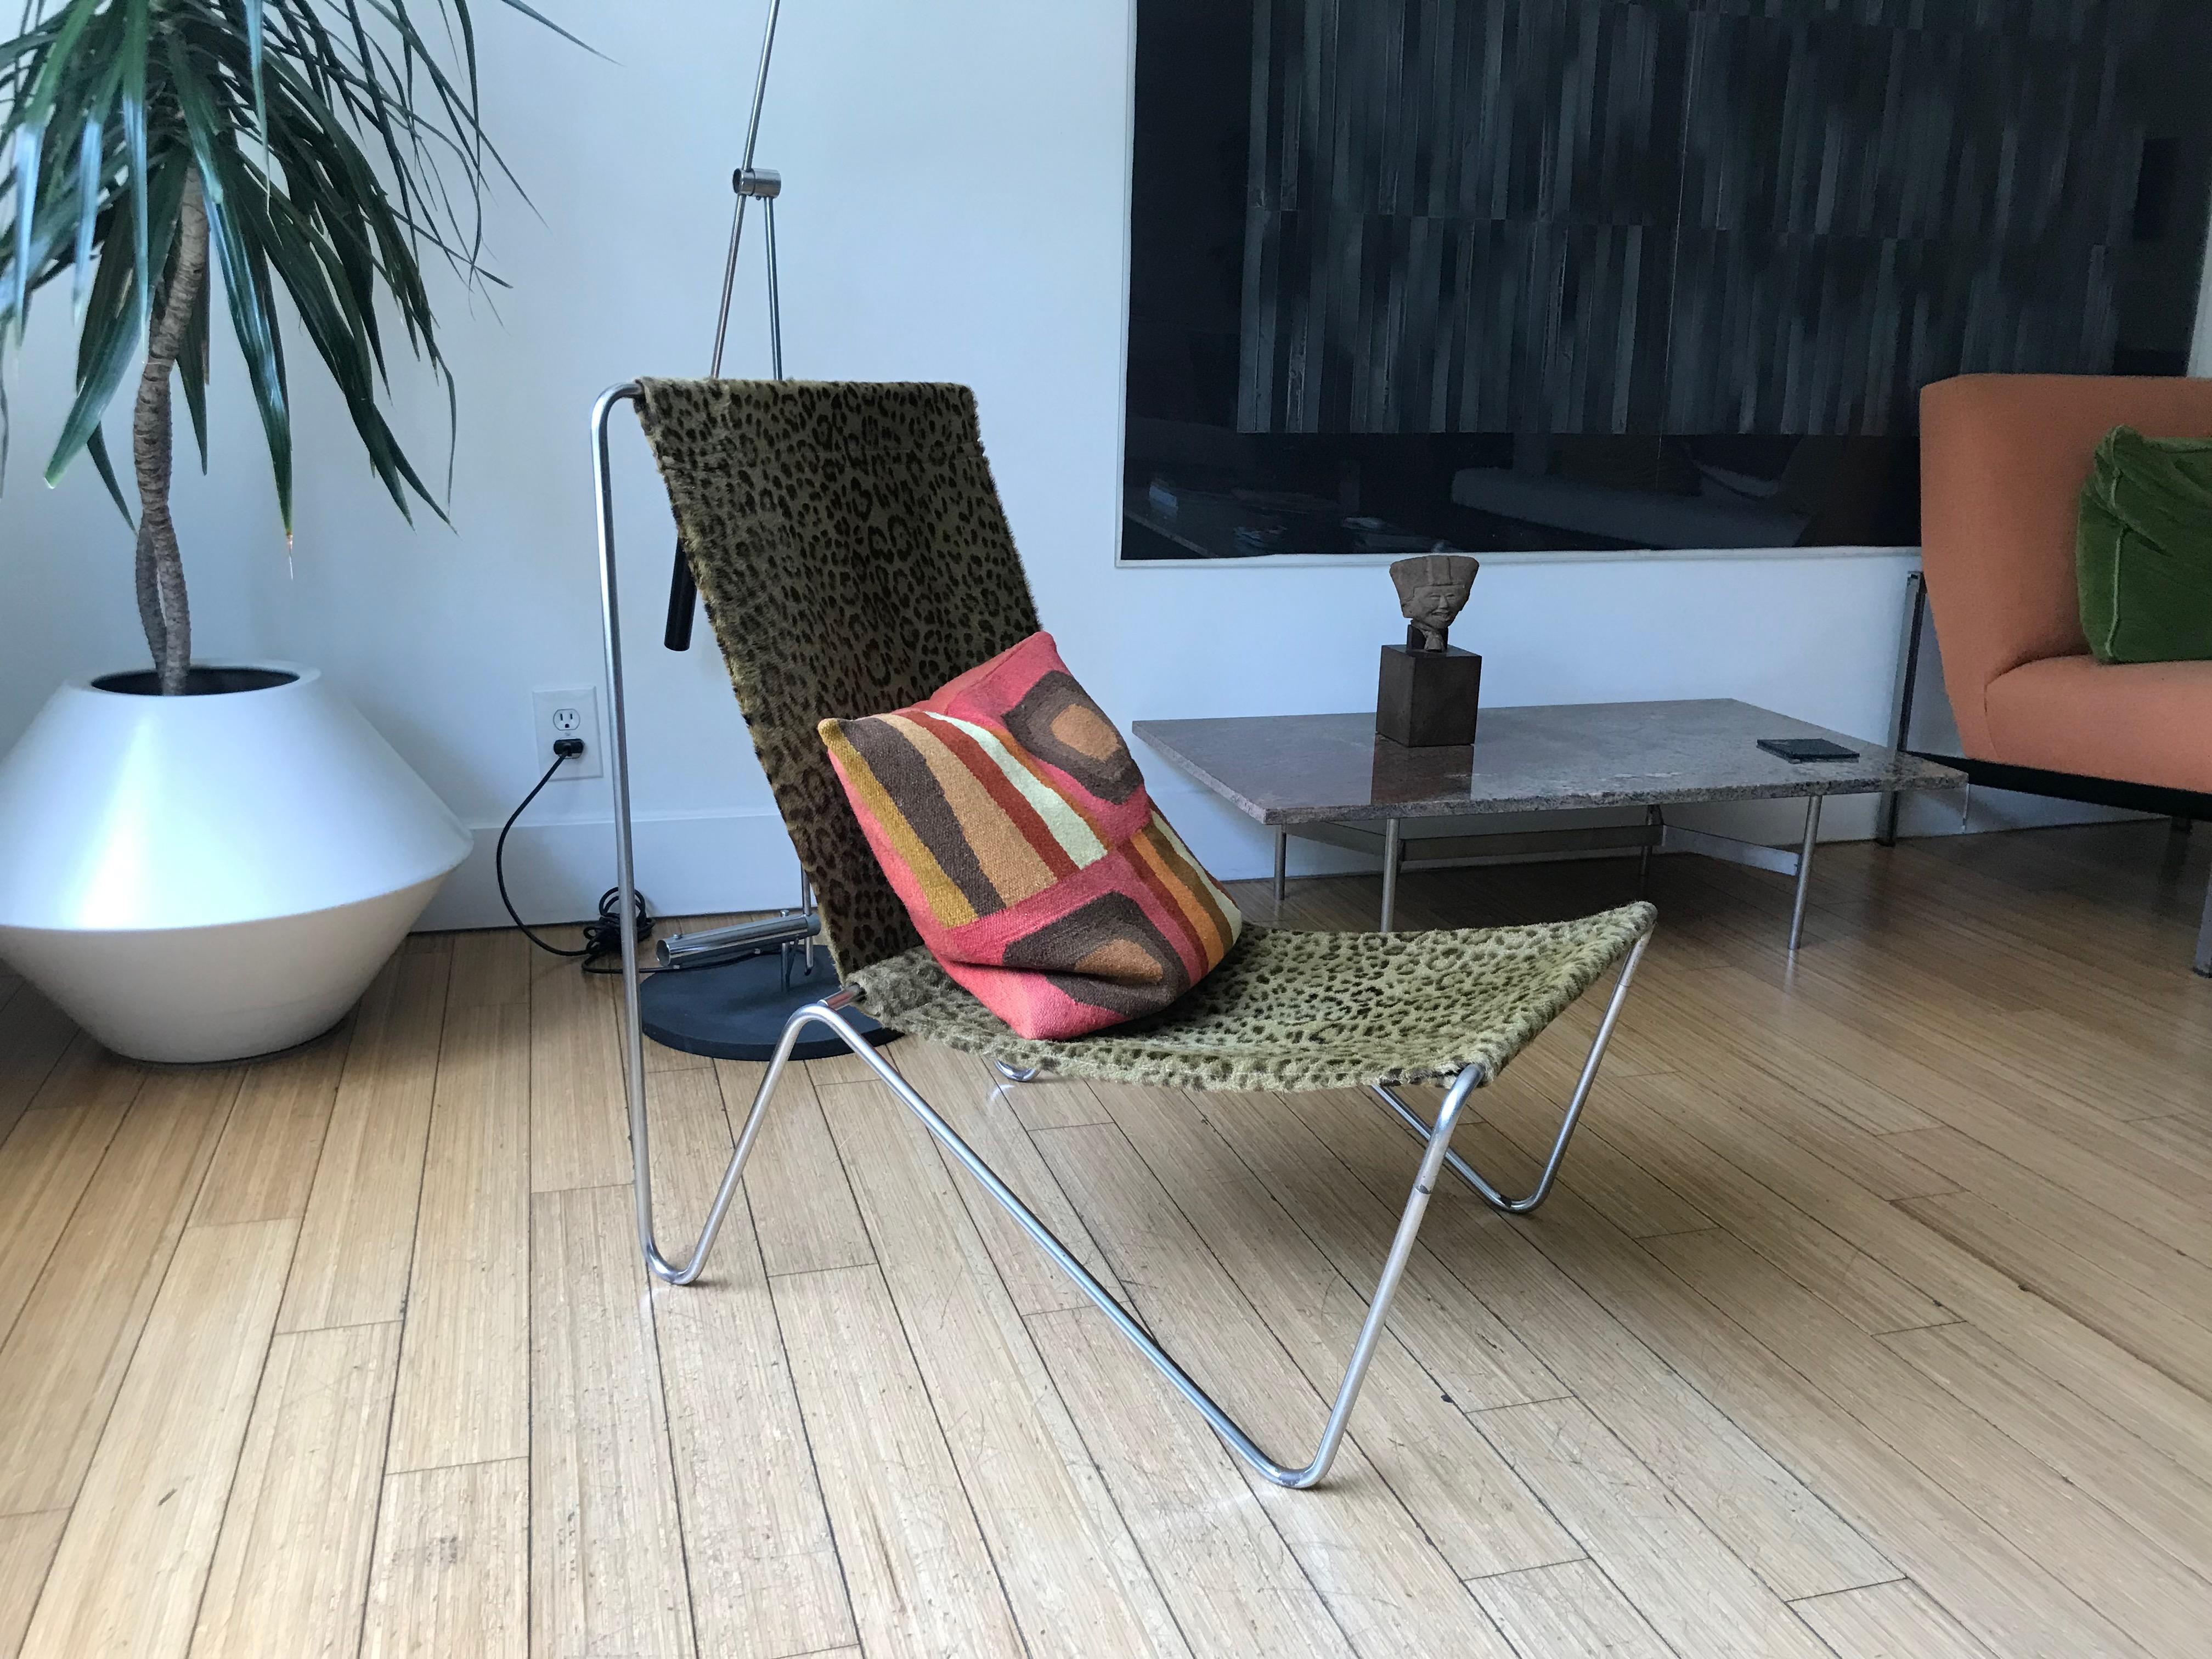 Simple and handsome modernist design.
Architectural steel form with the original leopard skin / leather sling seat. 
It has minor surface rust in between the bends at the base.
Nice patina.
No damage.
Solid and sturdy.
Great for occasional